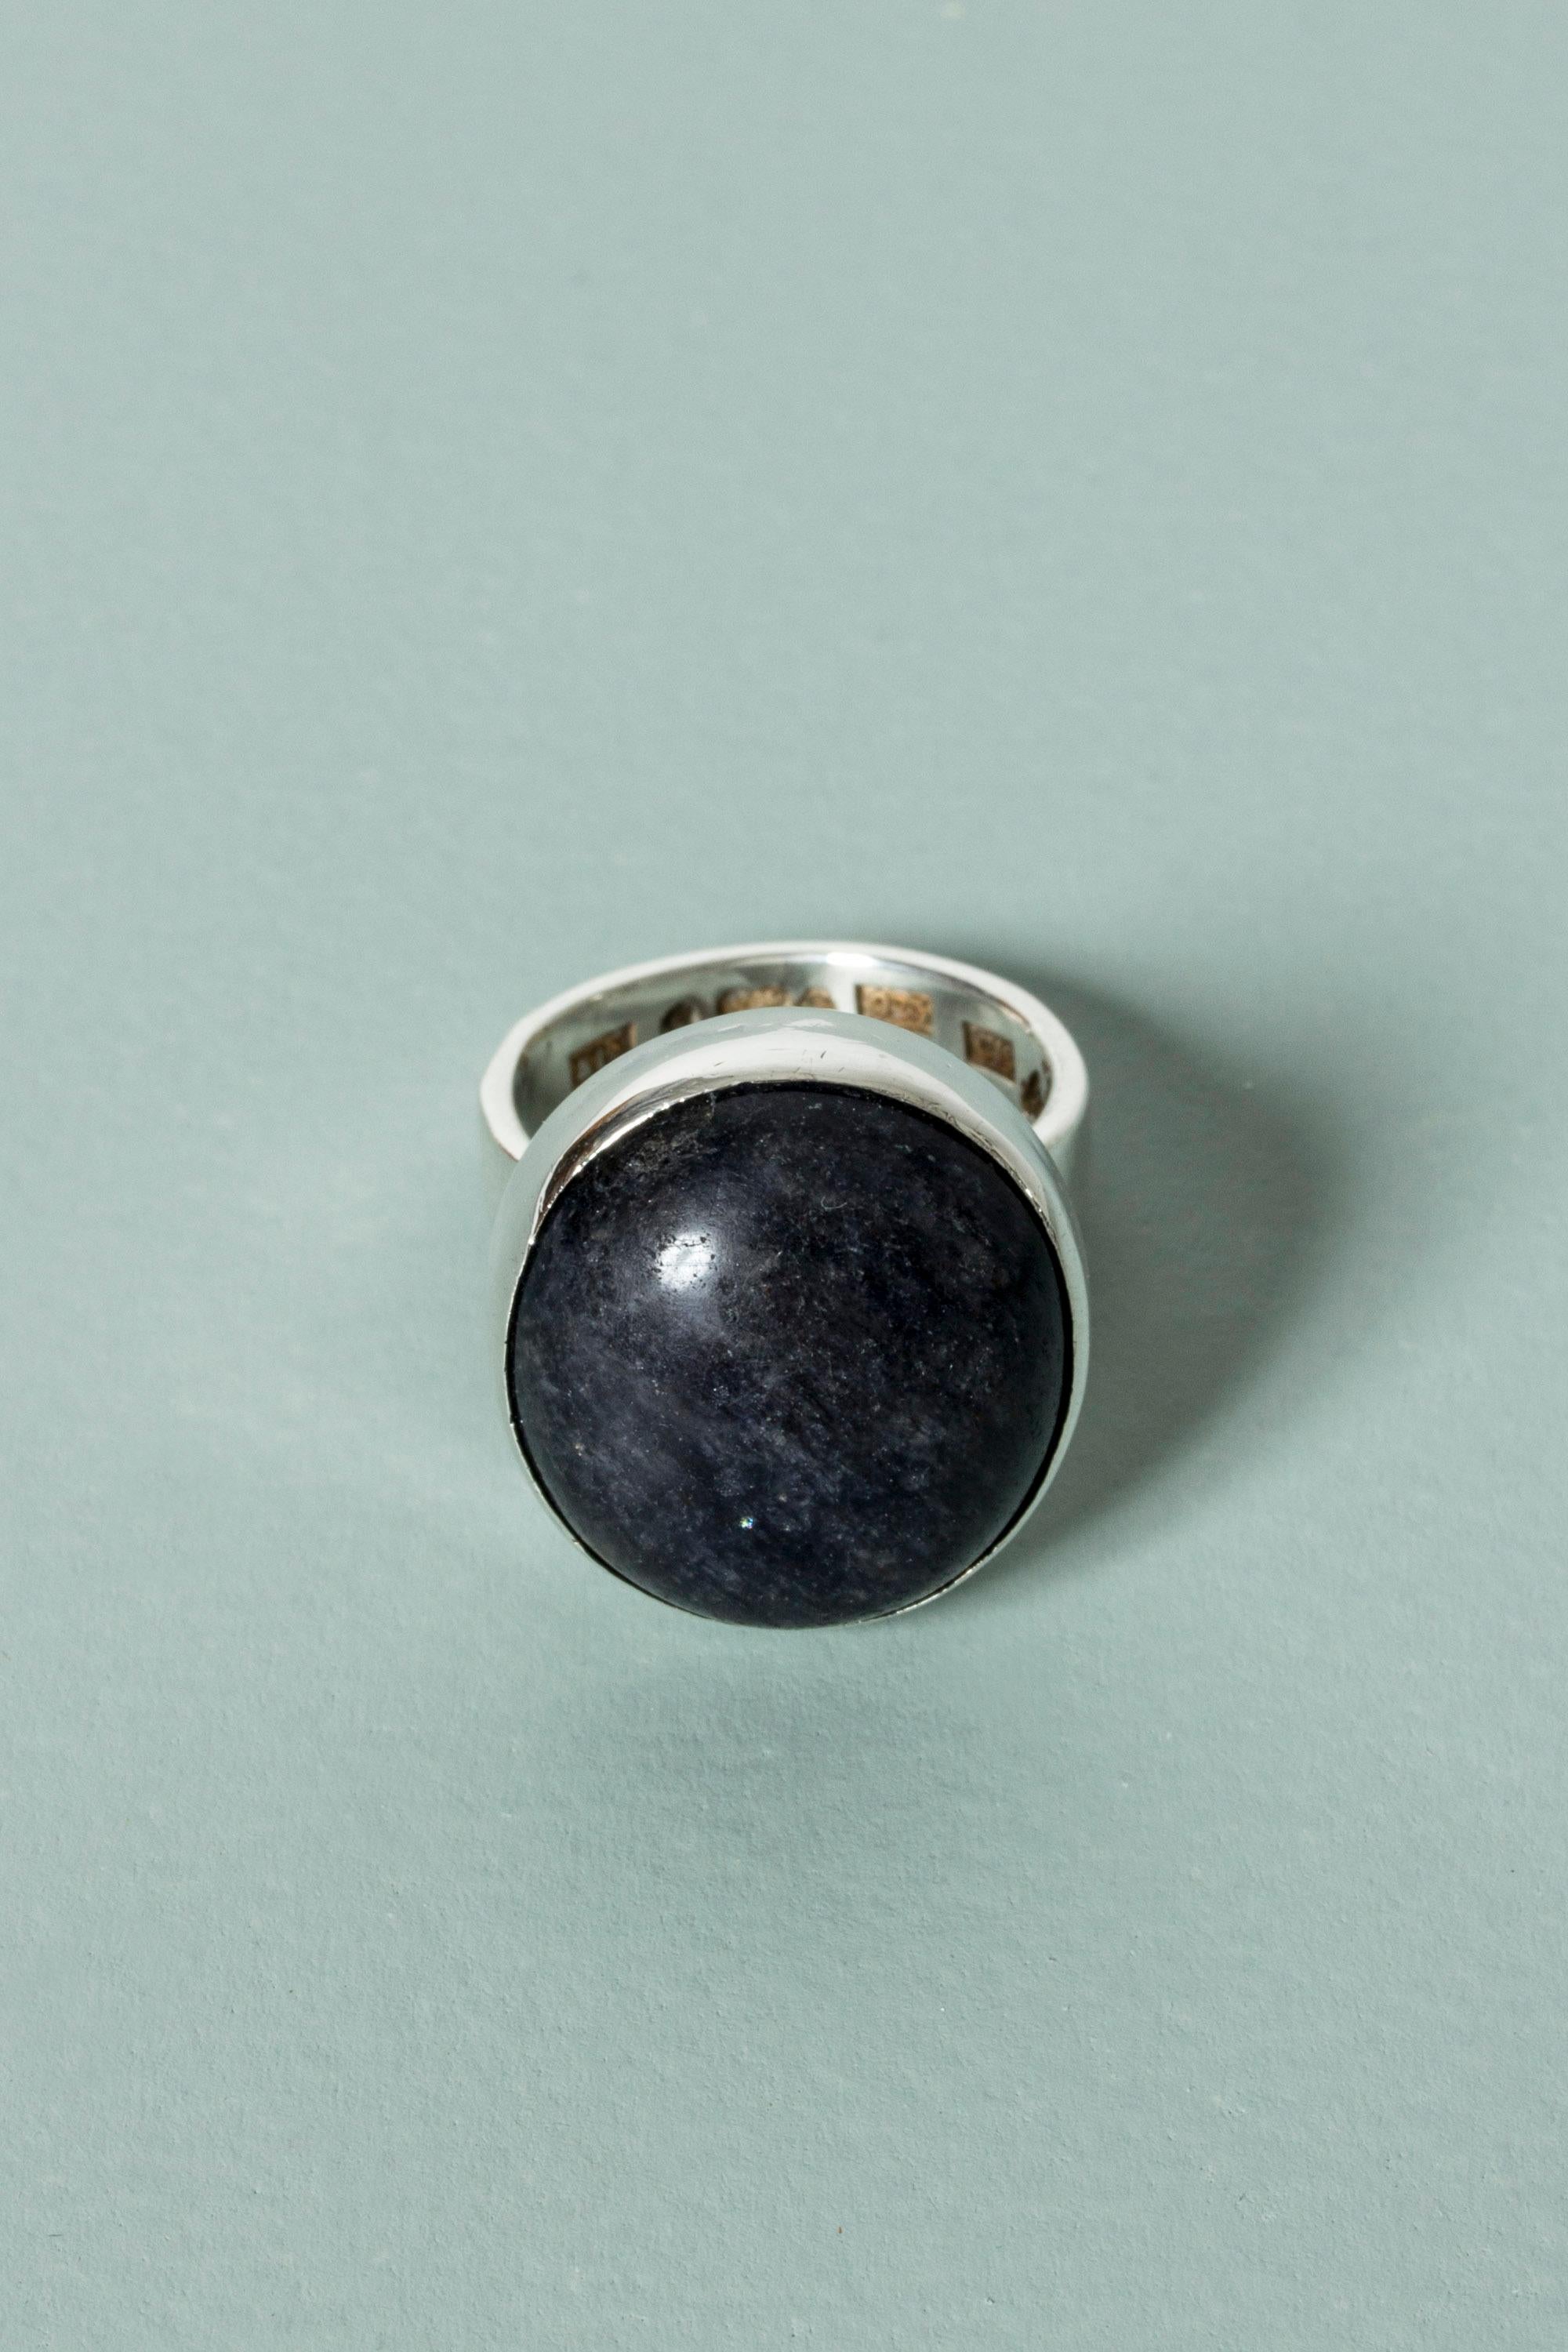 Cool silver ring by Cecilia Johansson, with a dark blue sodalite stone. Rounded, chunky look with a nice, solid feel.